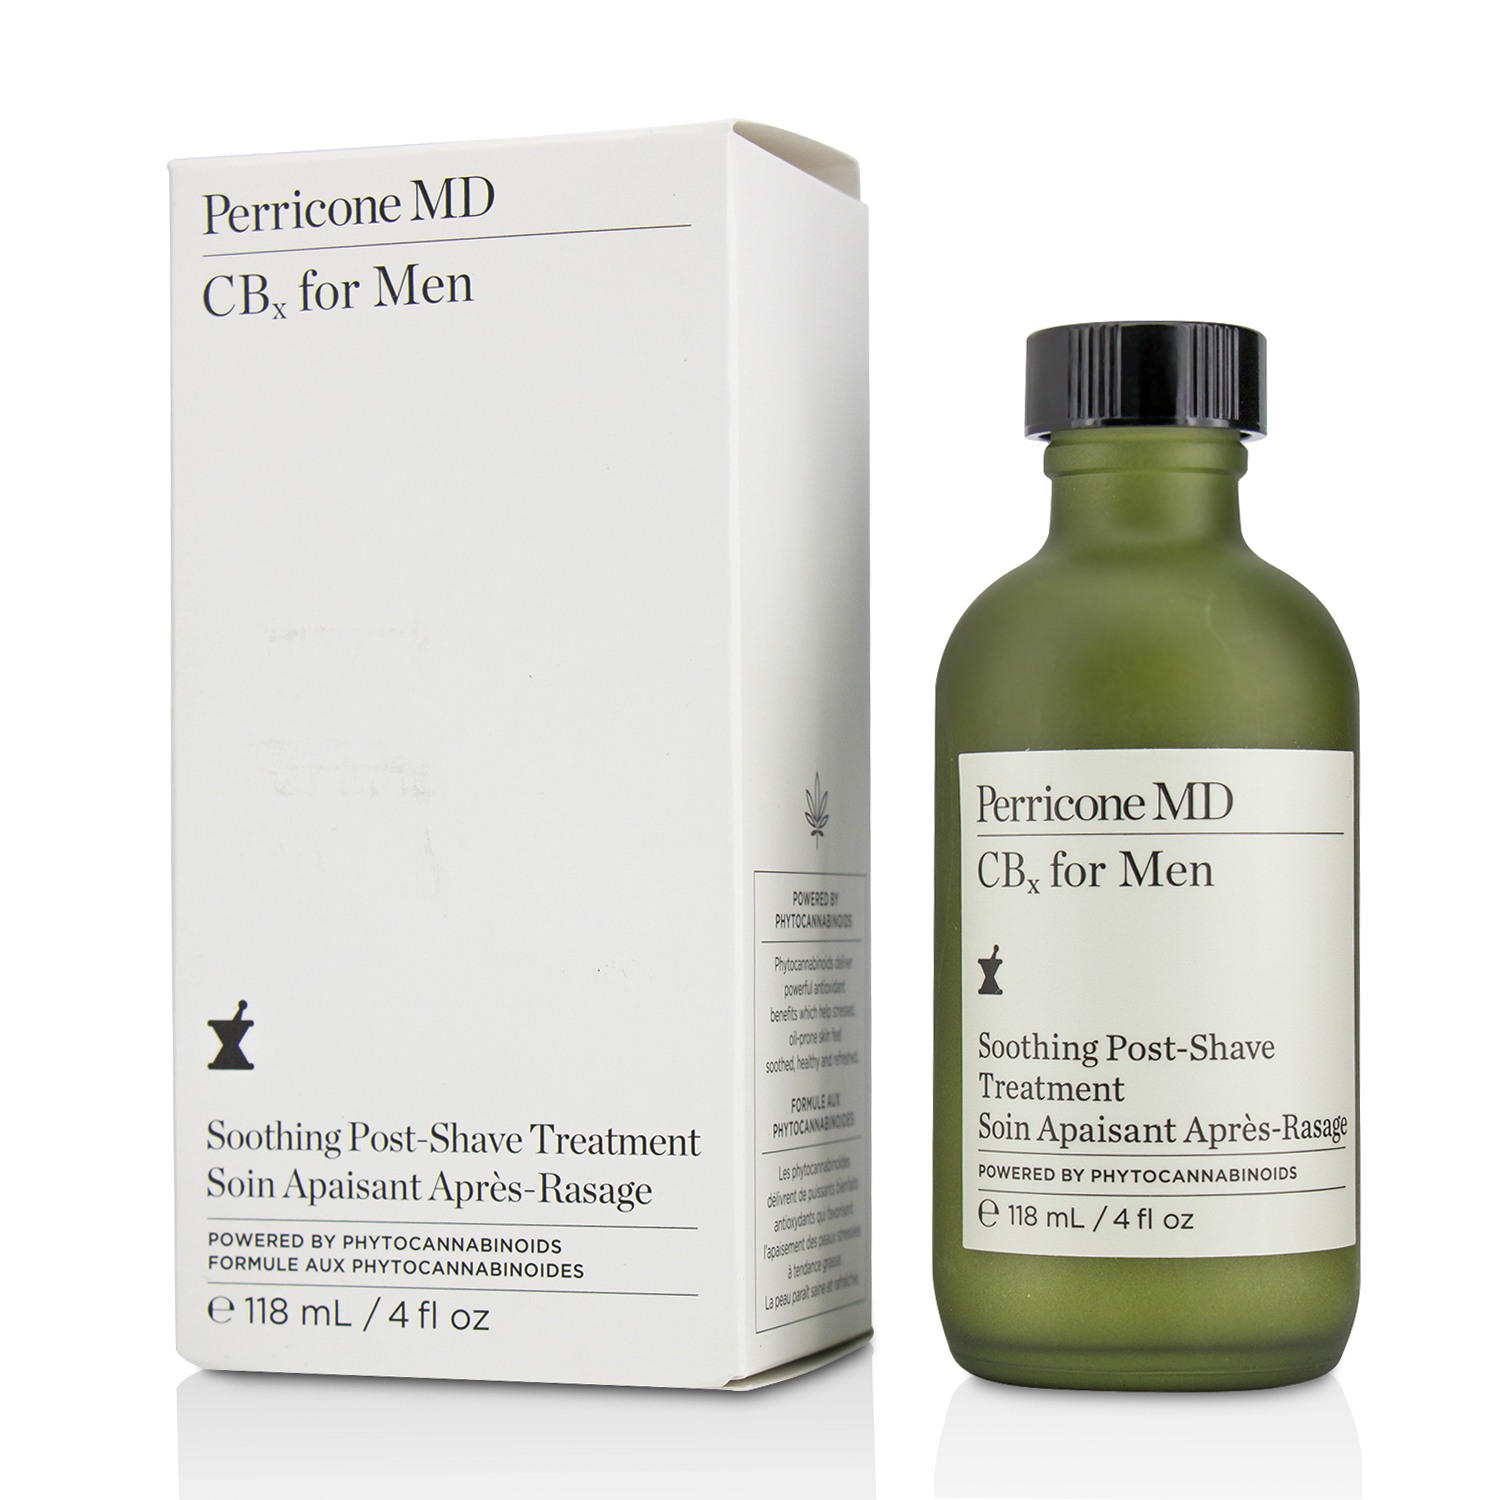 CBx For Men Soothing Post-Shave Treatment Perricone MD Image